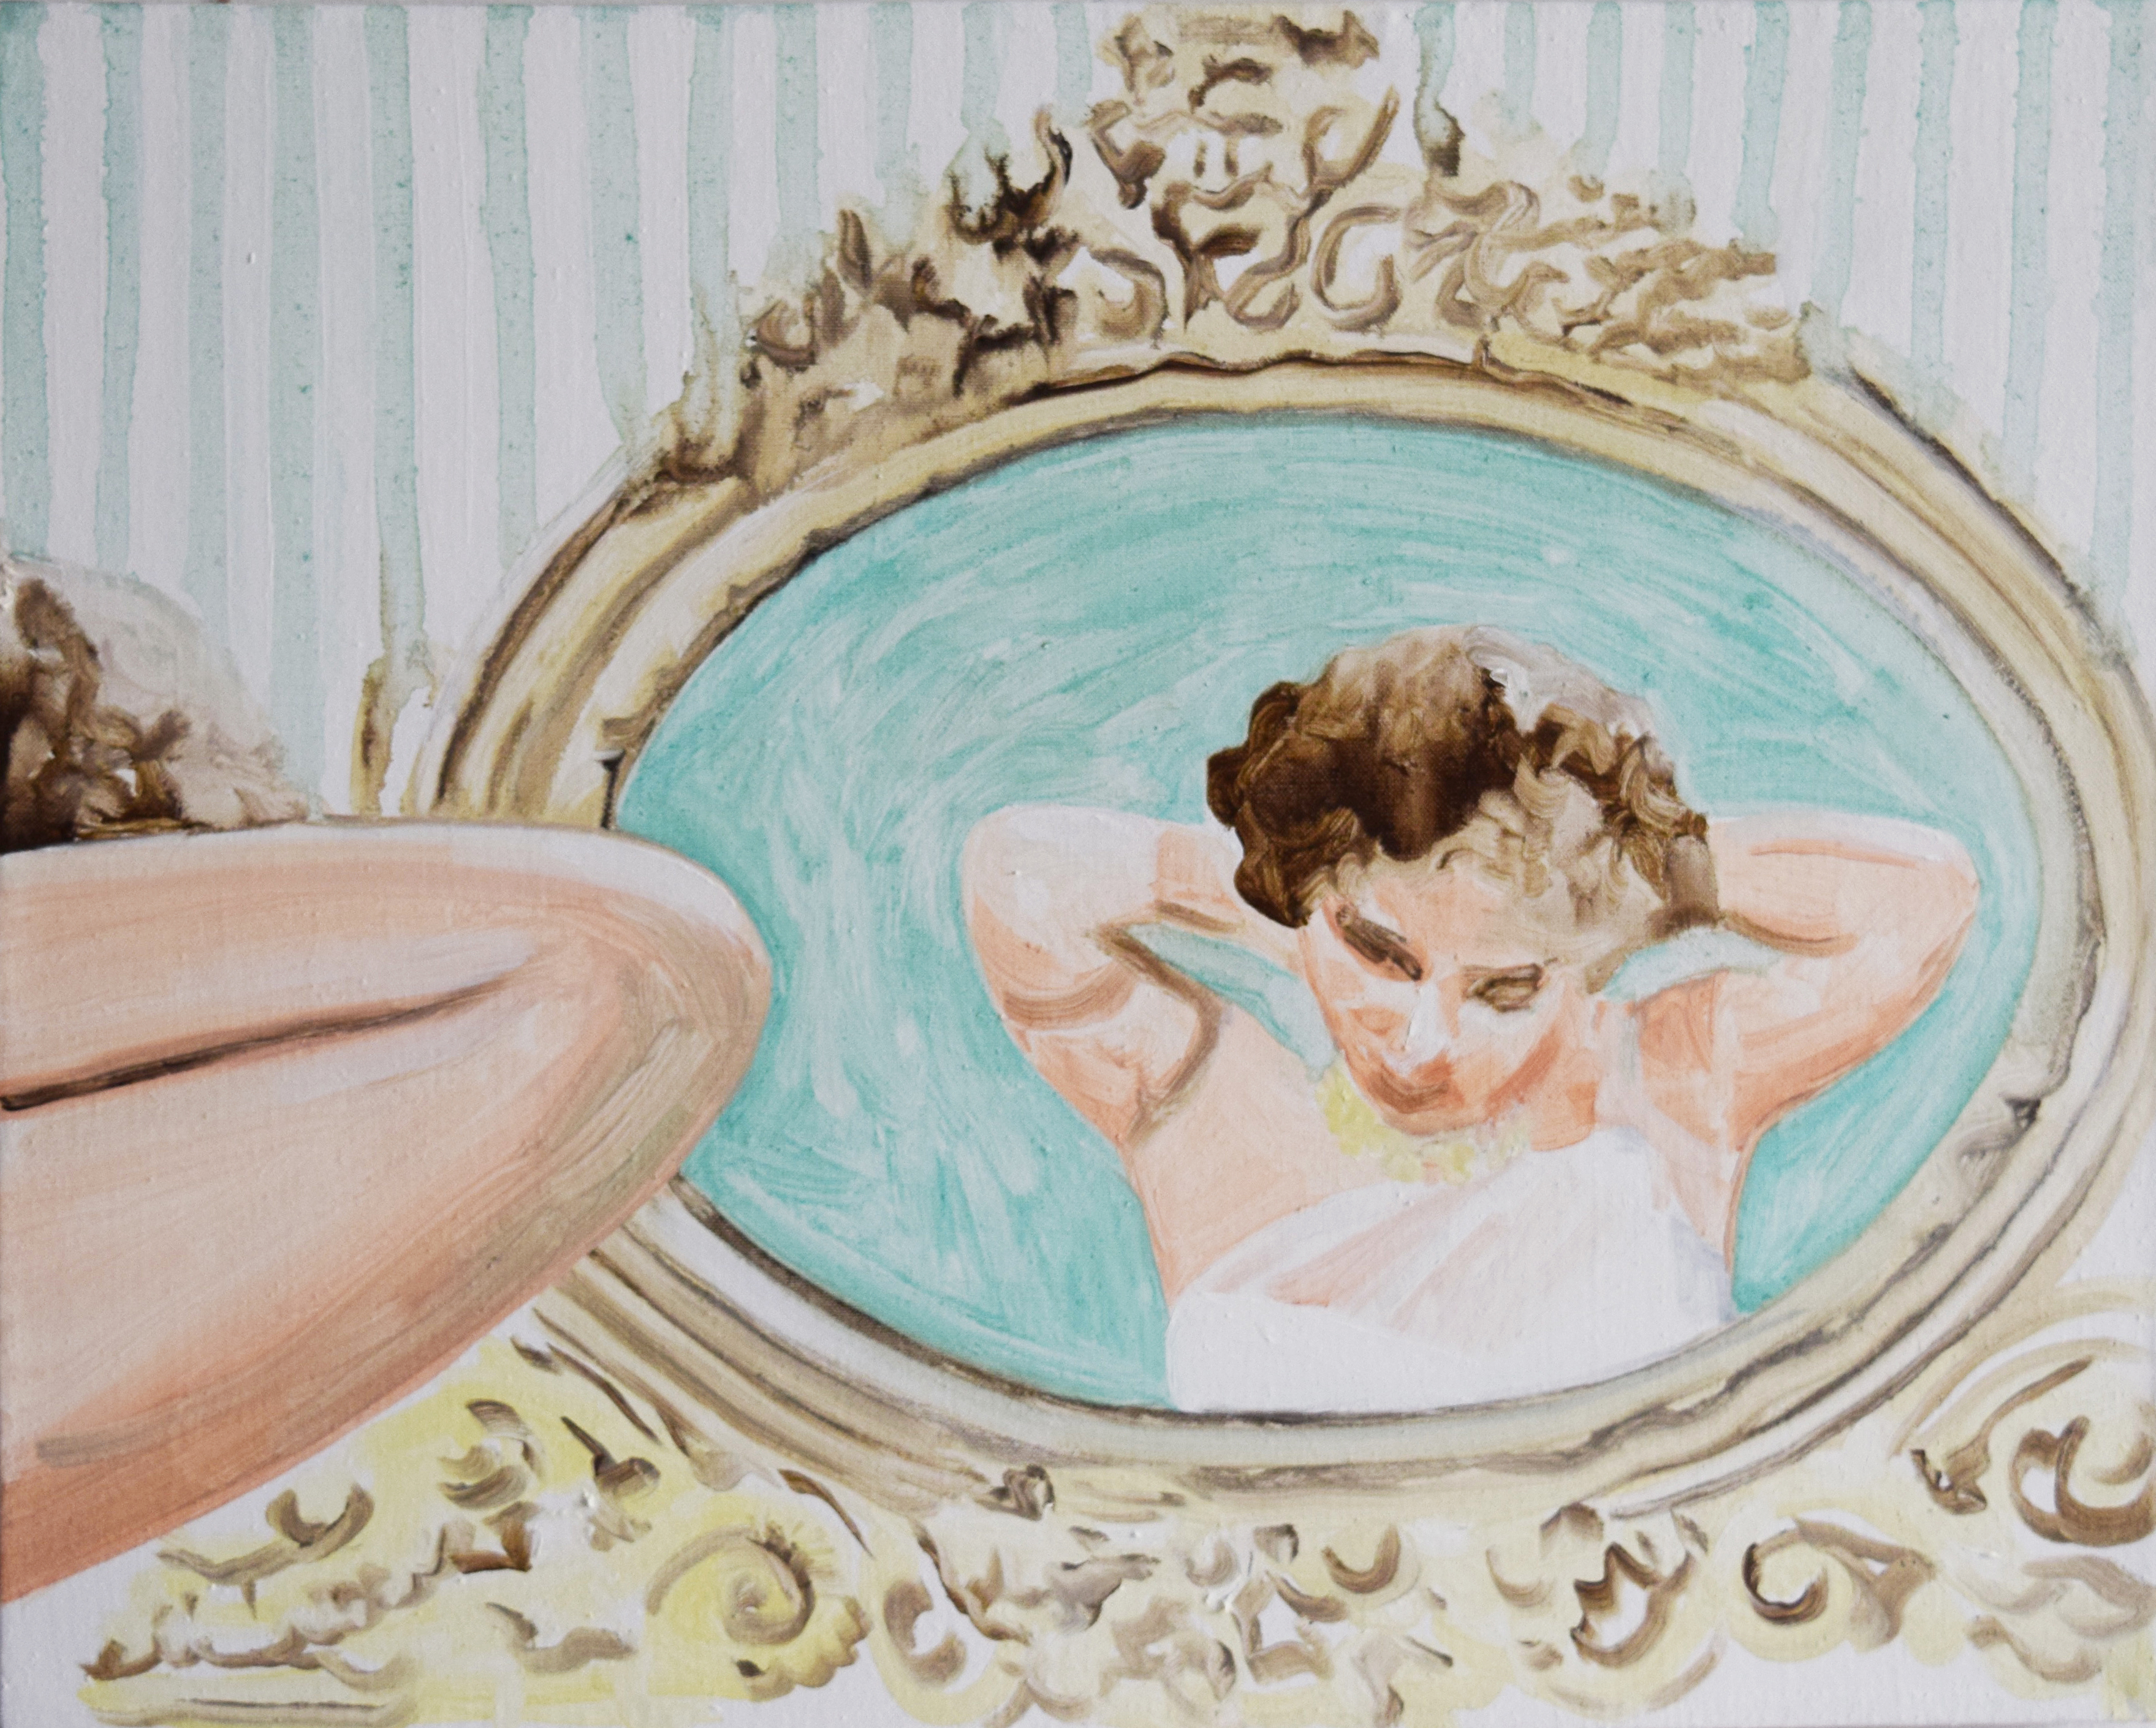 A painting of a woman's reflection in a mirror, getting dressed